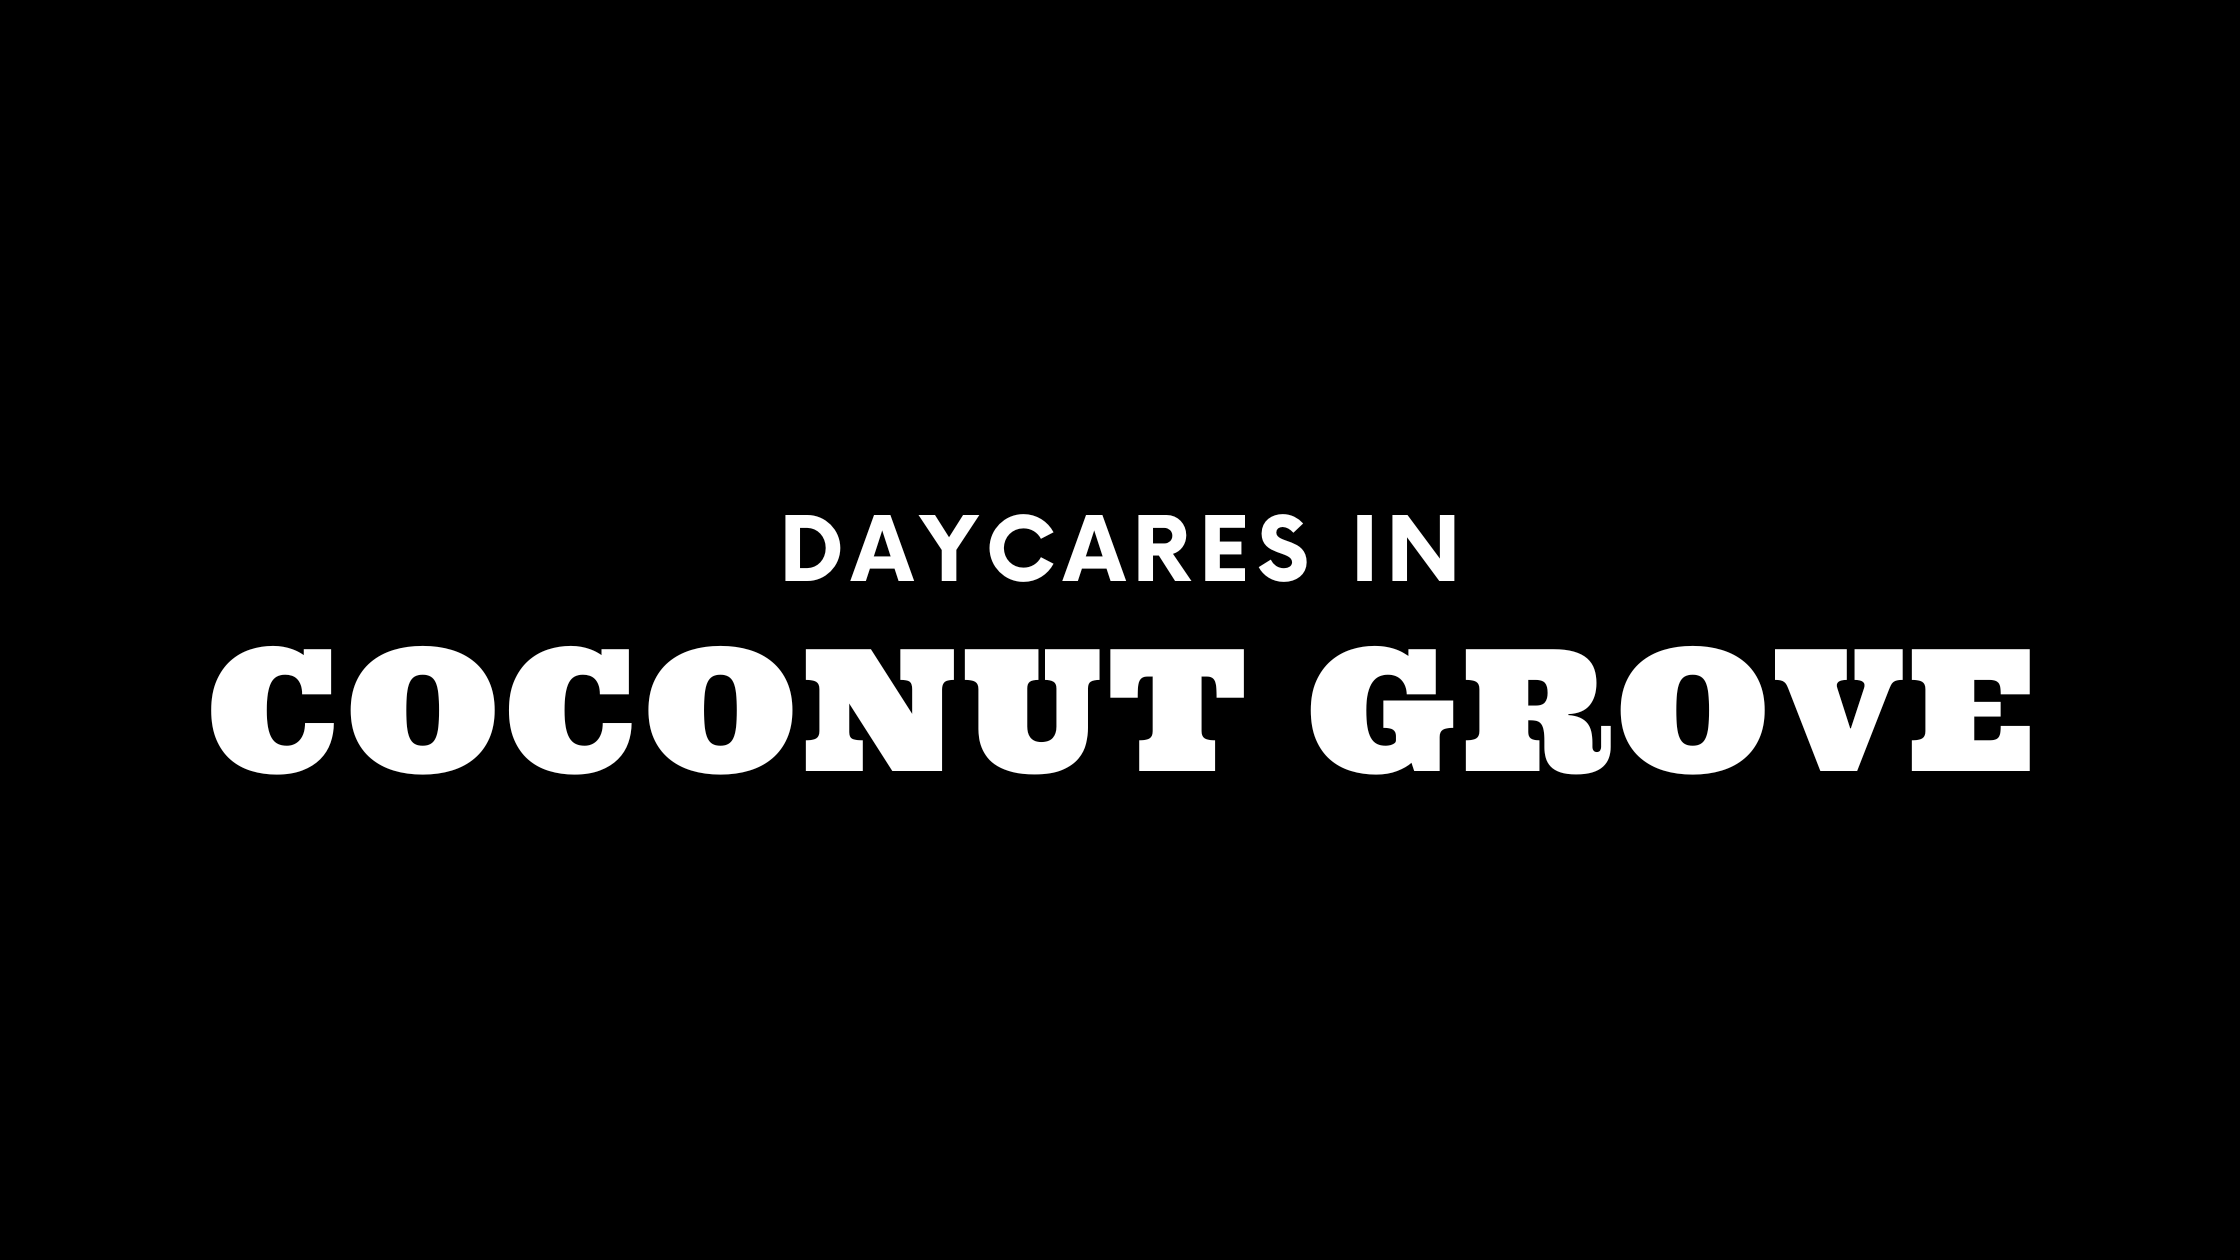 Daycares in Coconut Grove